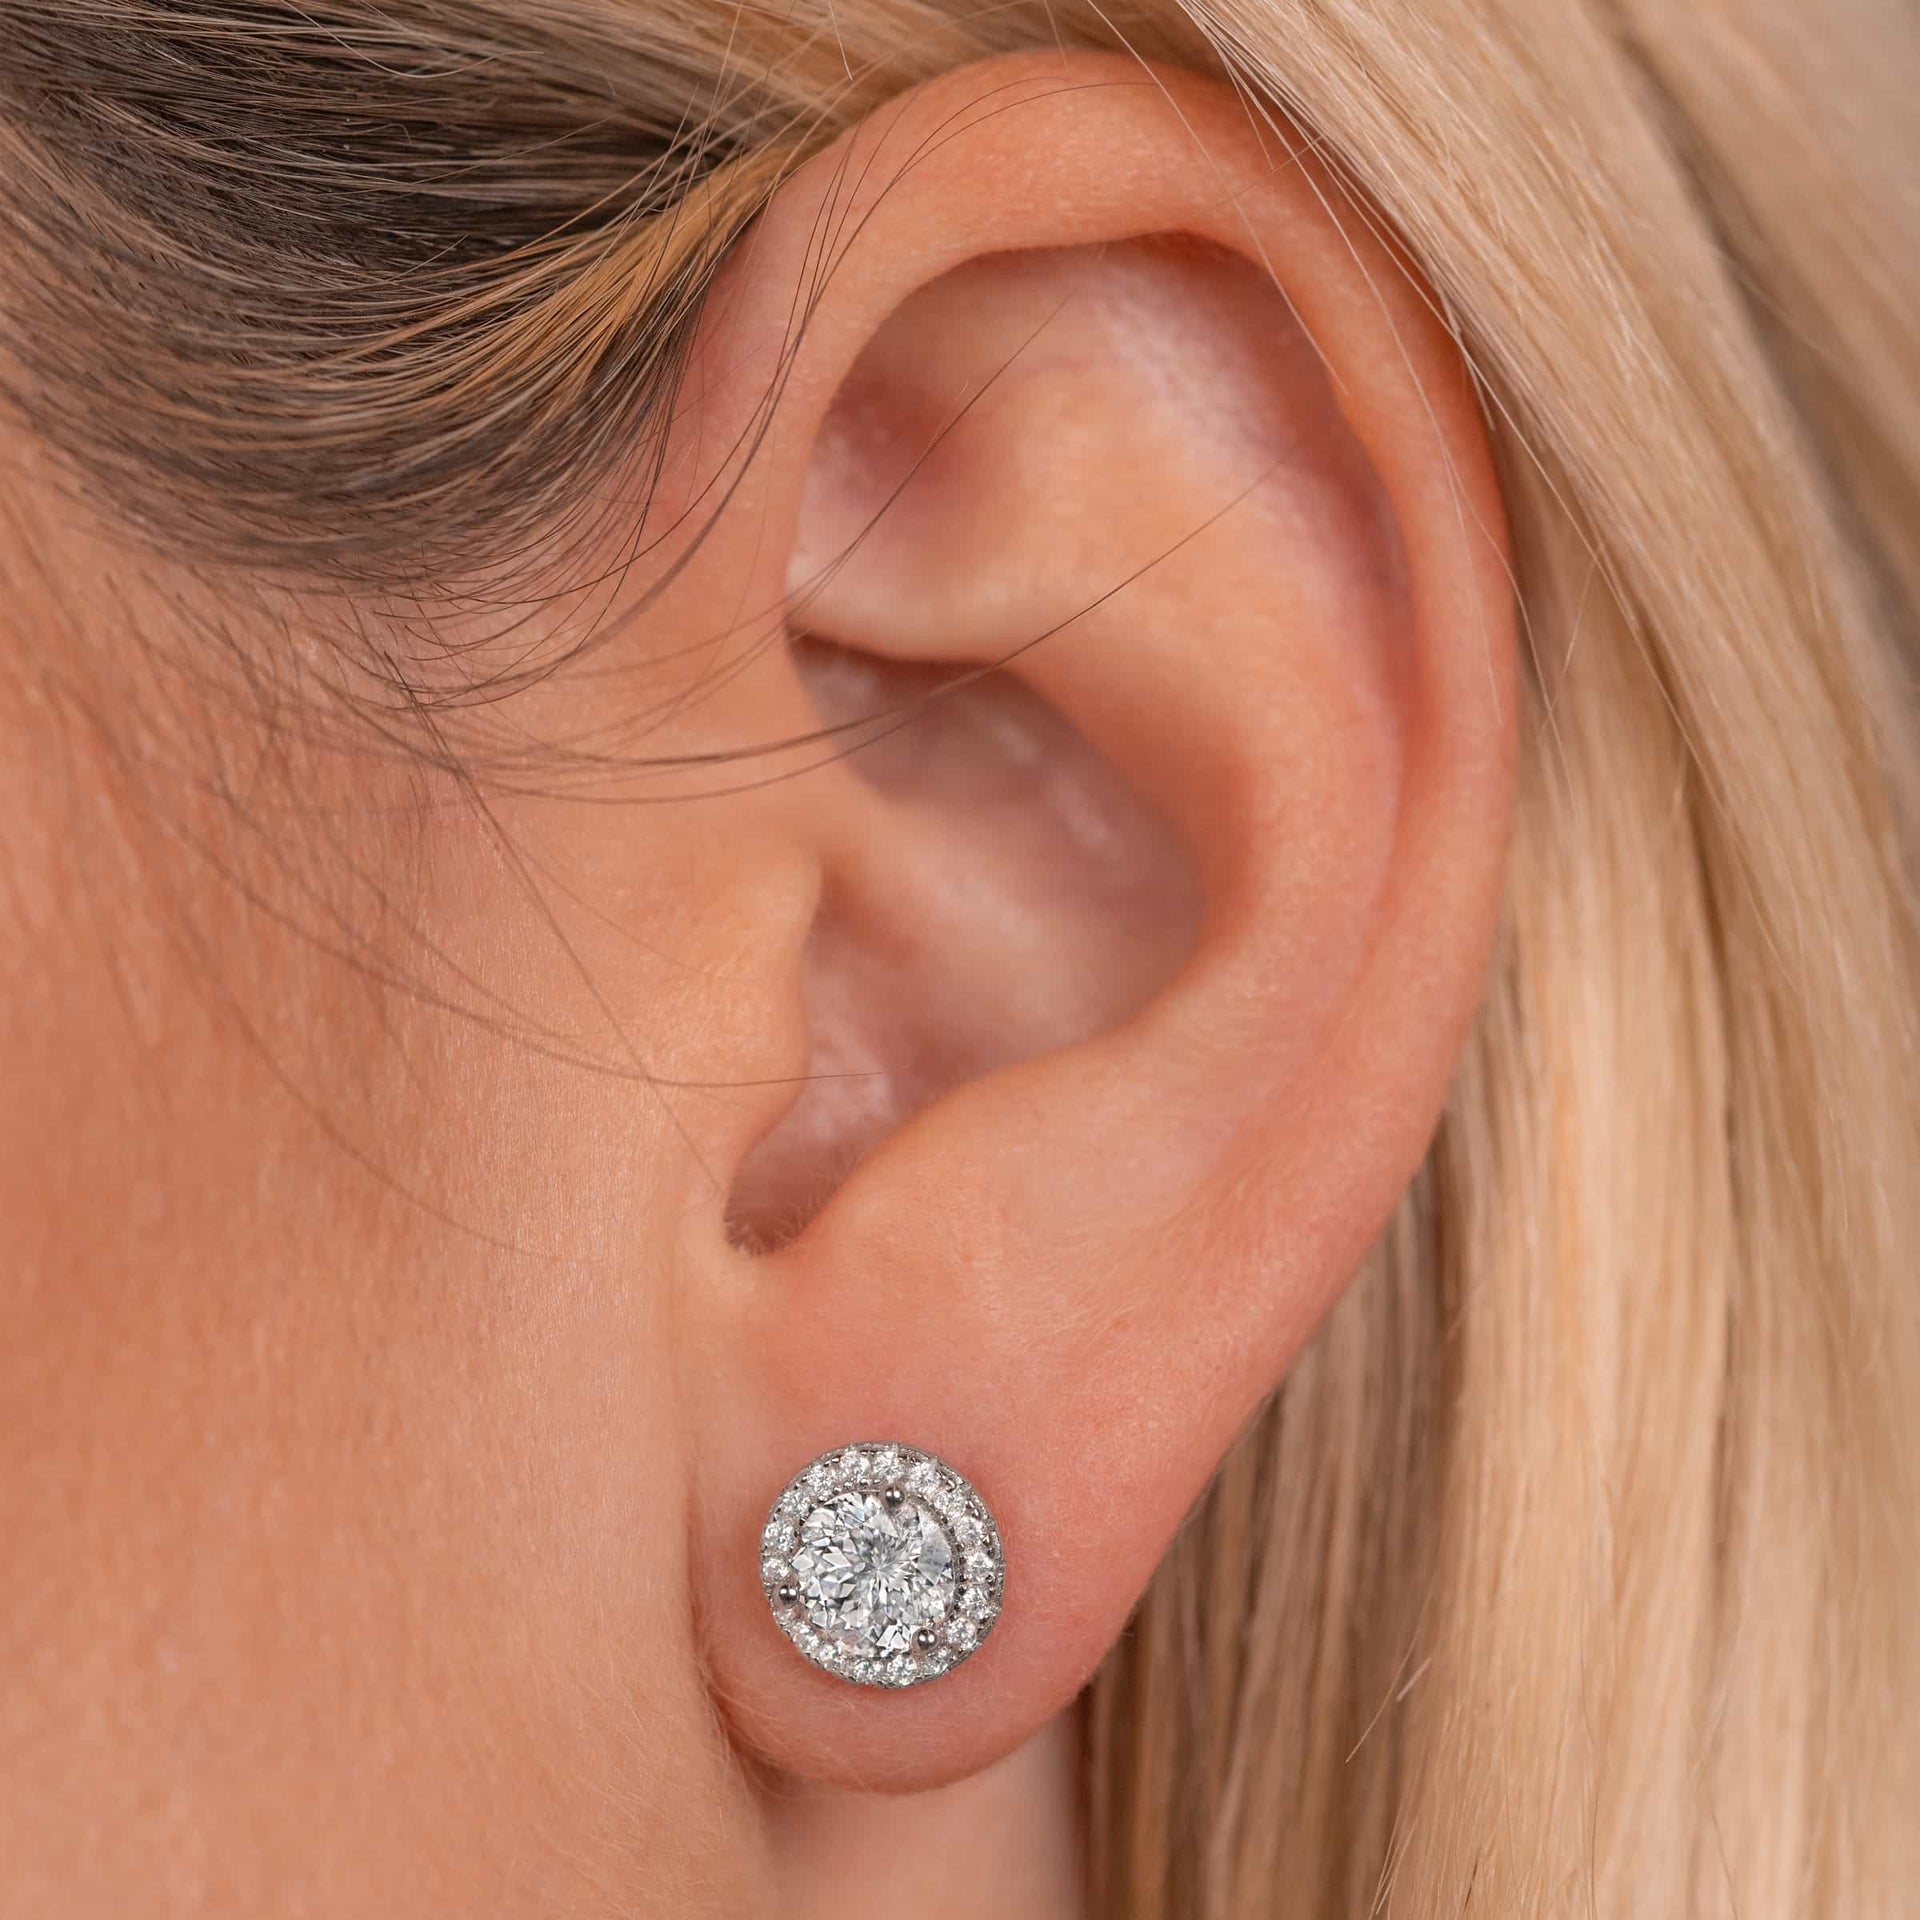 Silver round stone stud earrings